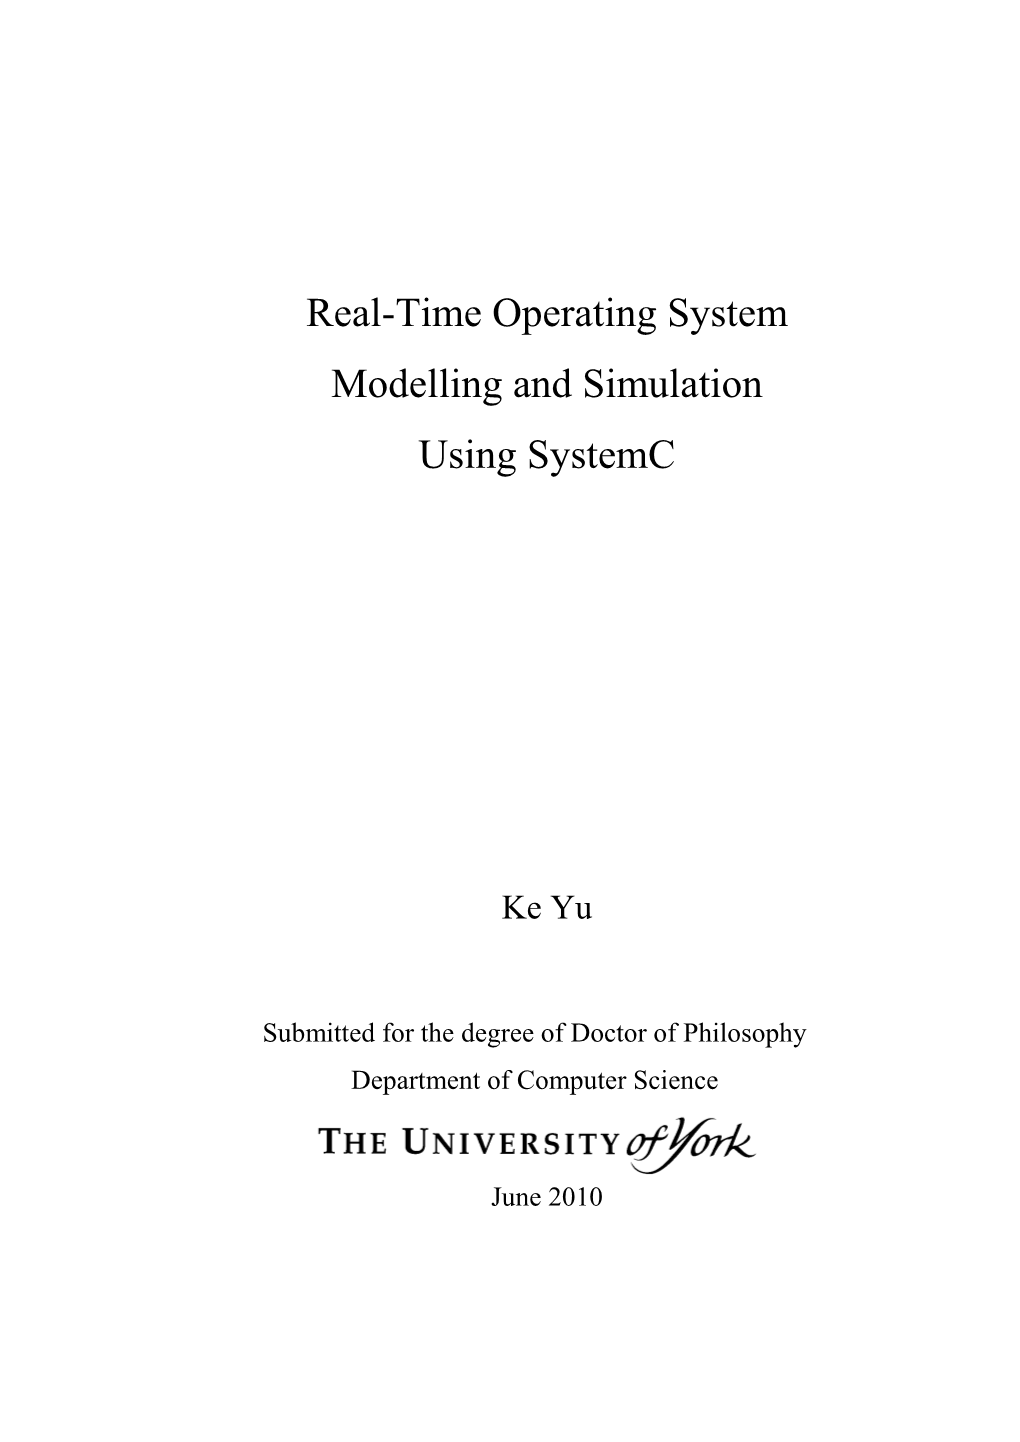 Real-Time Operating System Modelling and Simulation Using Systemc